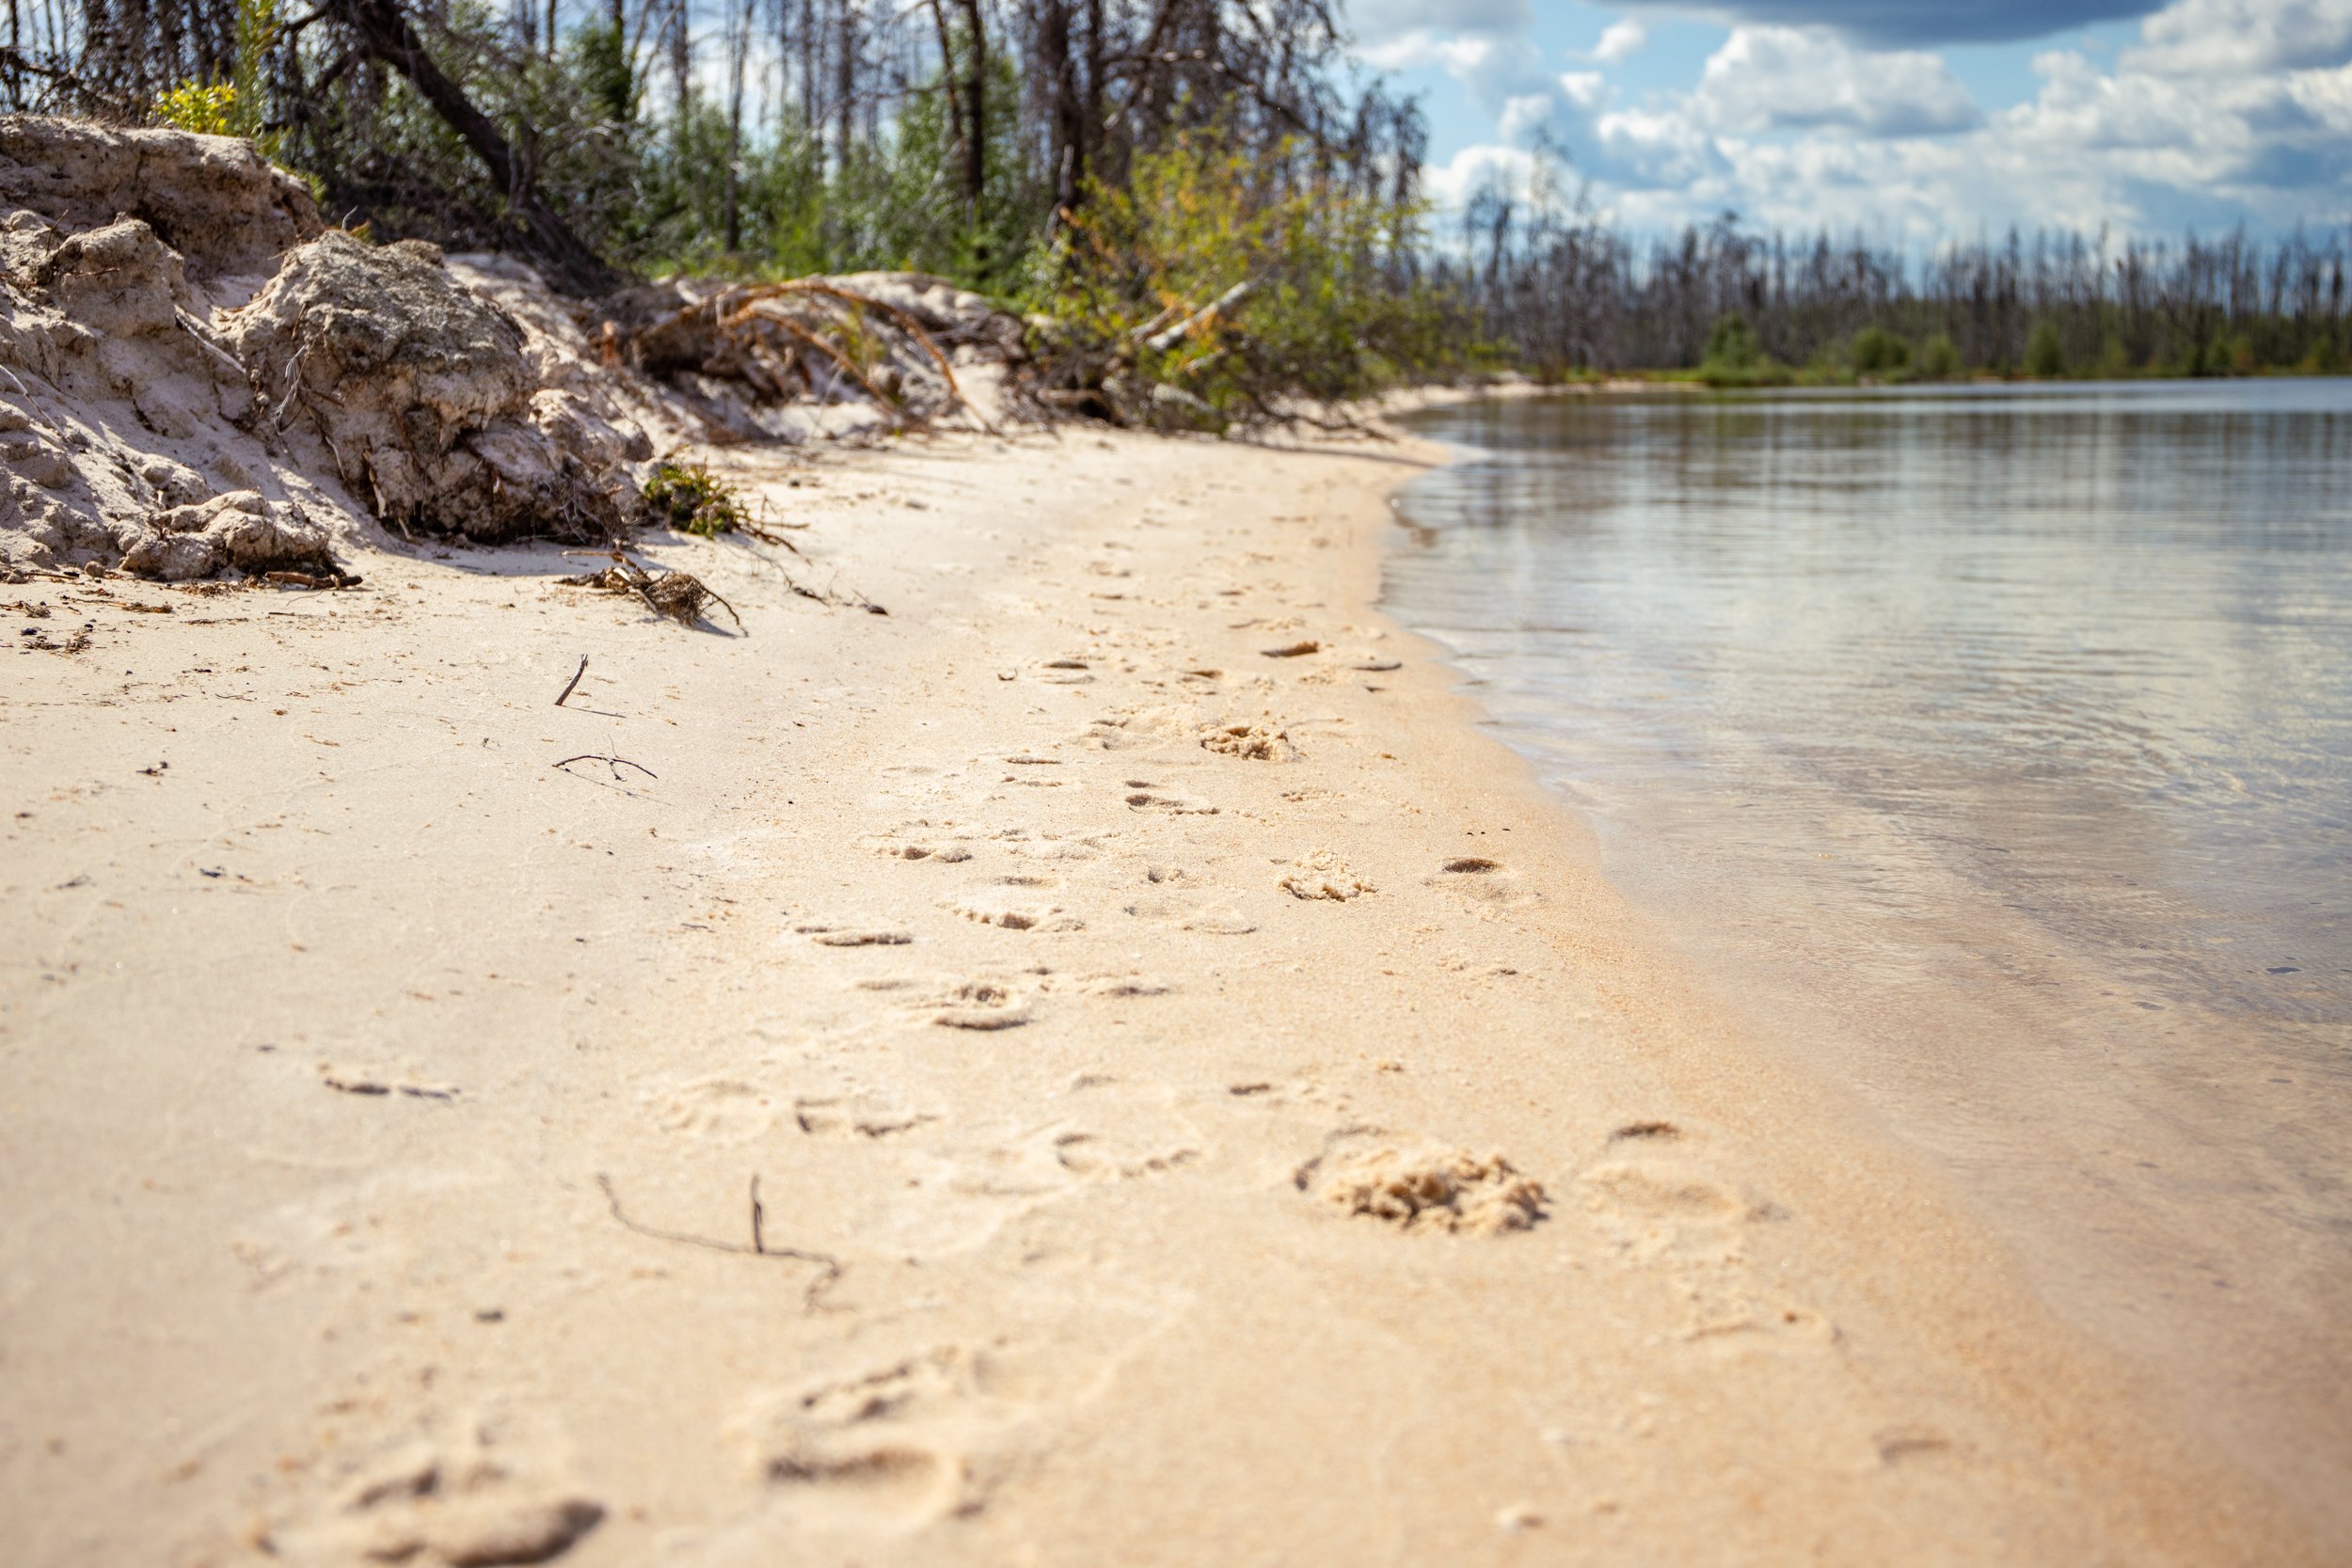 Foot prints in the sand on this secluded Northern beach.